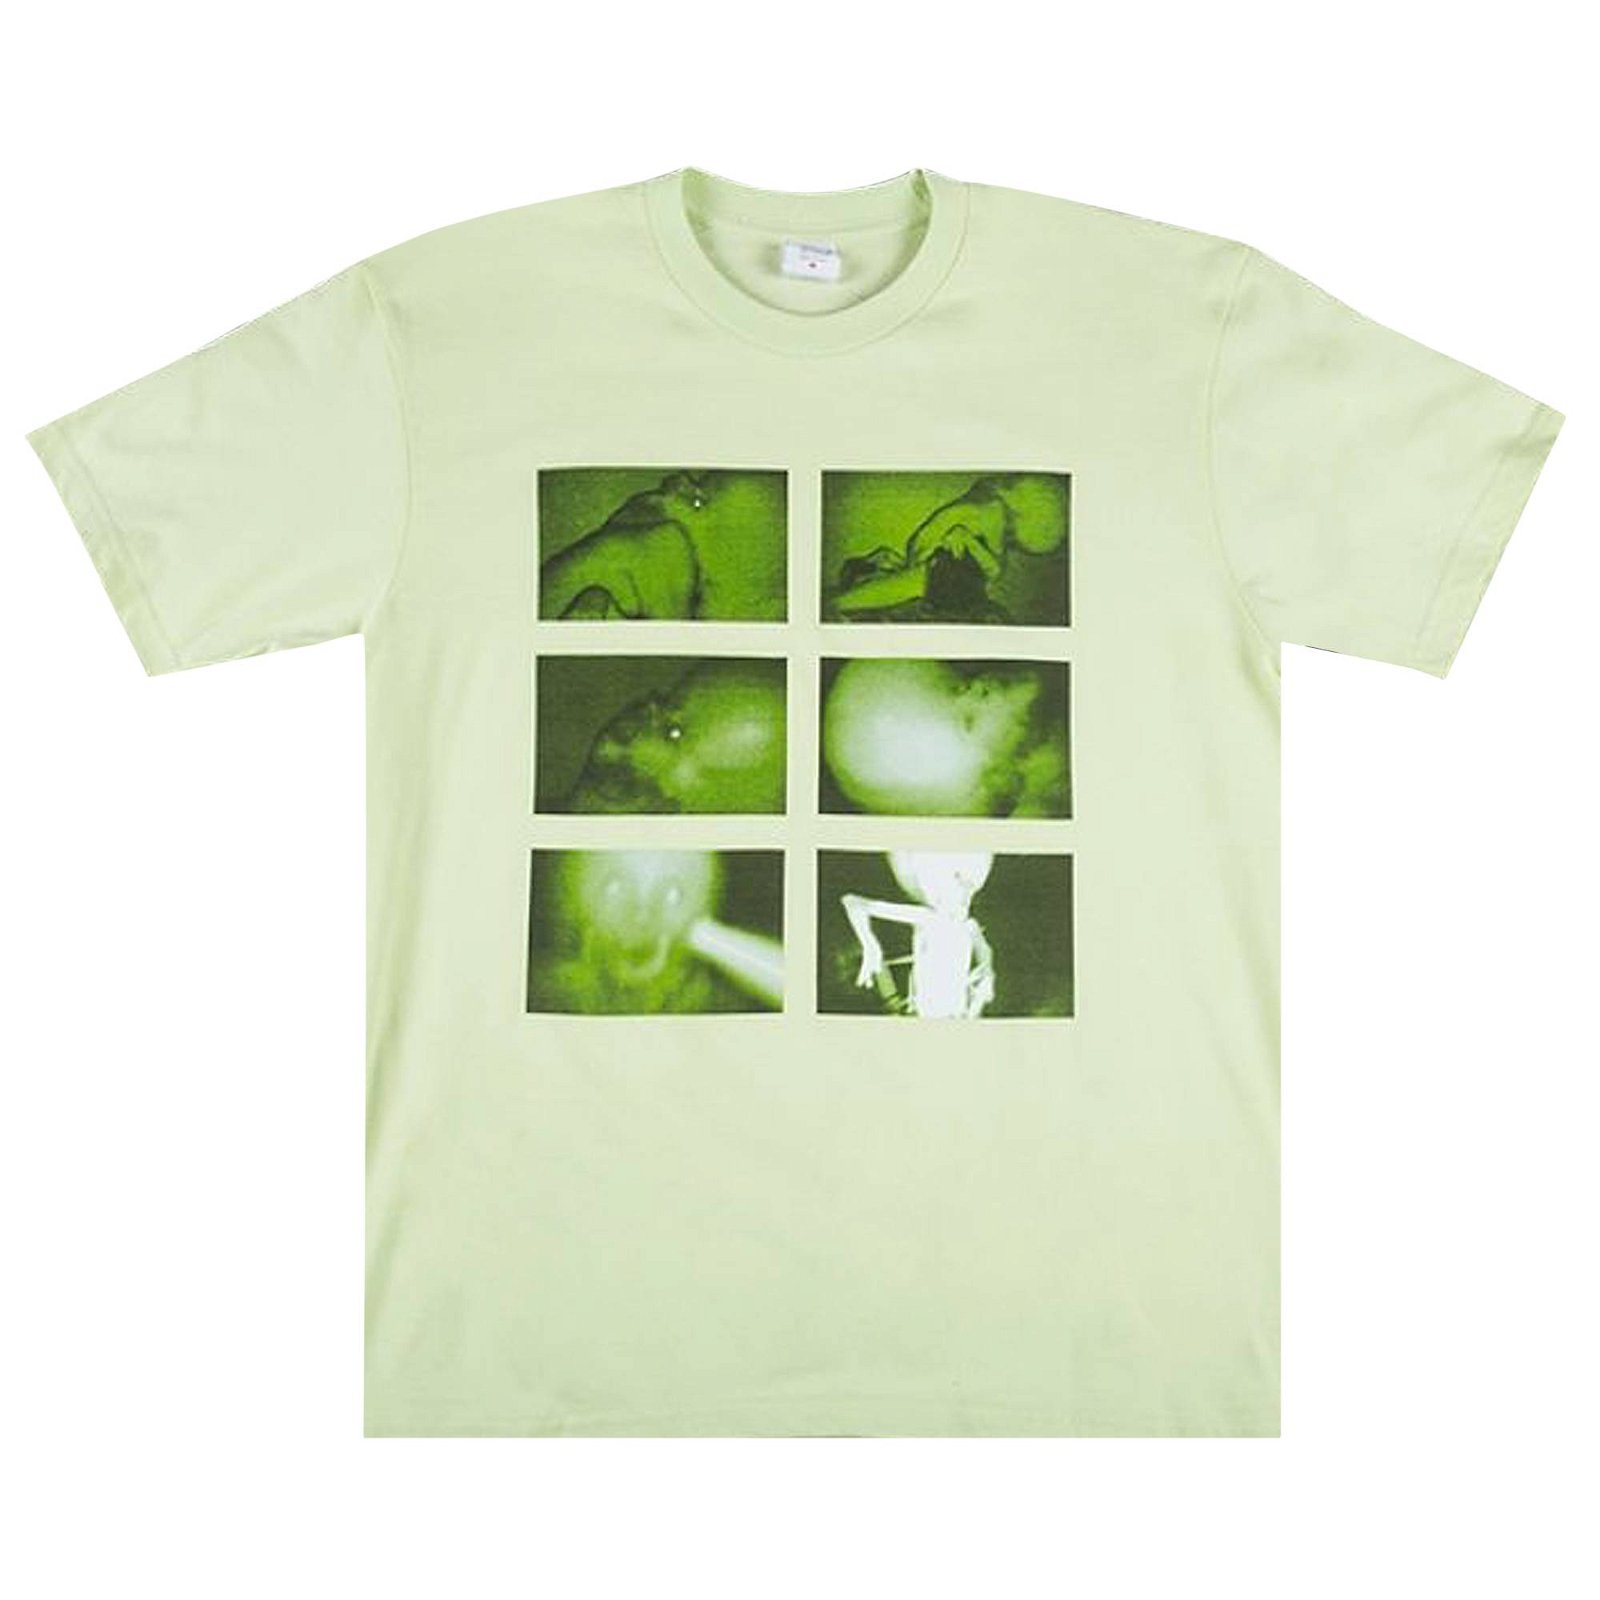 T-shirt Supreme Chris Cunningham Rubber Johnny Tee FW18T14 PALE 